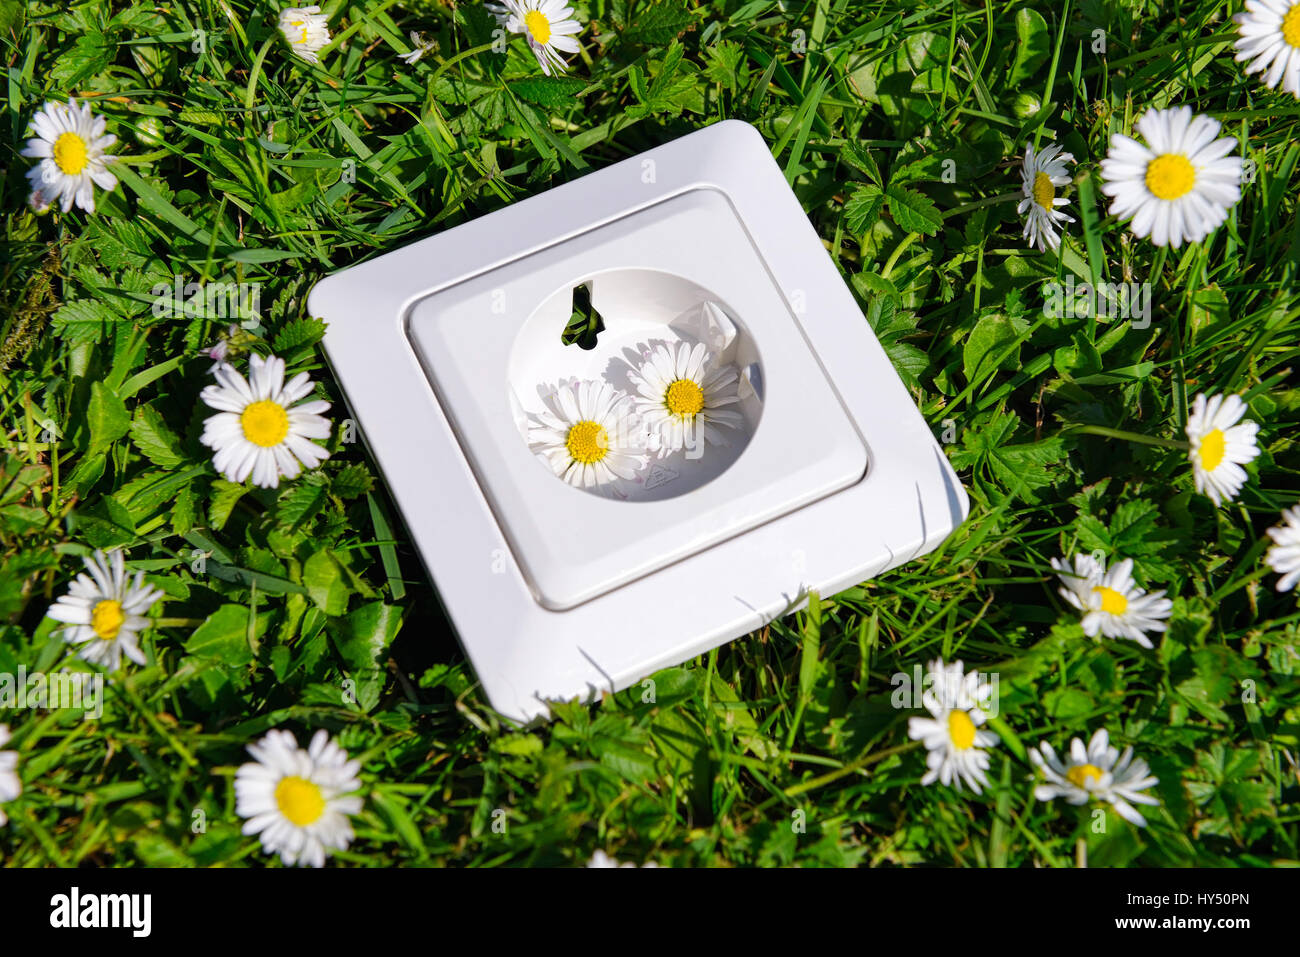 Outlet on lawn, ecological stream, Steckdose auf Rasen, oekostrom Stock Photo